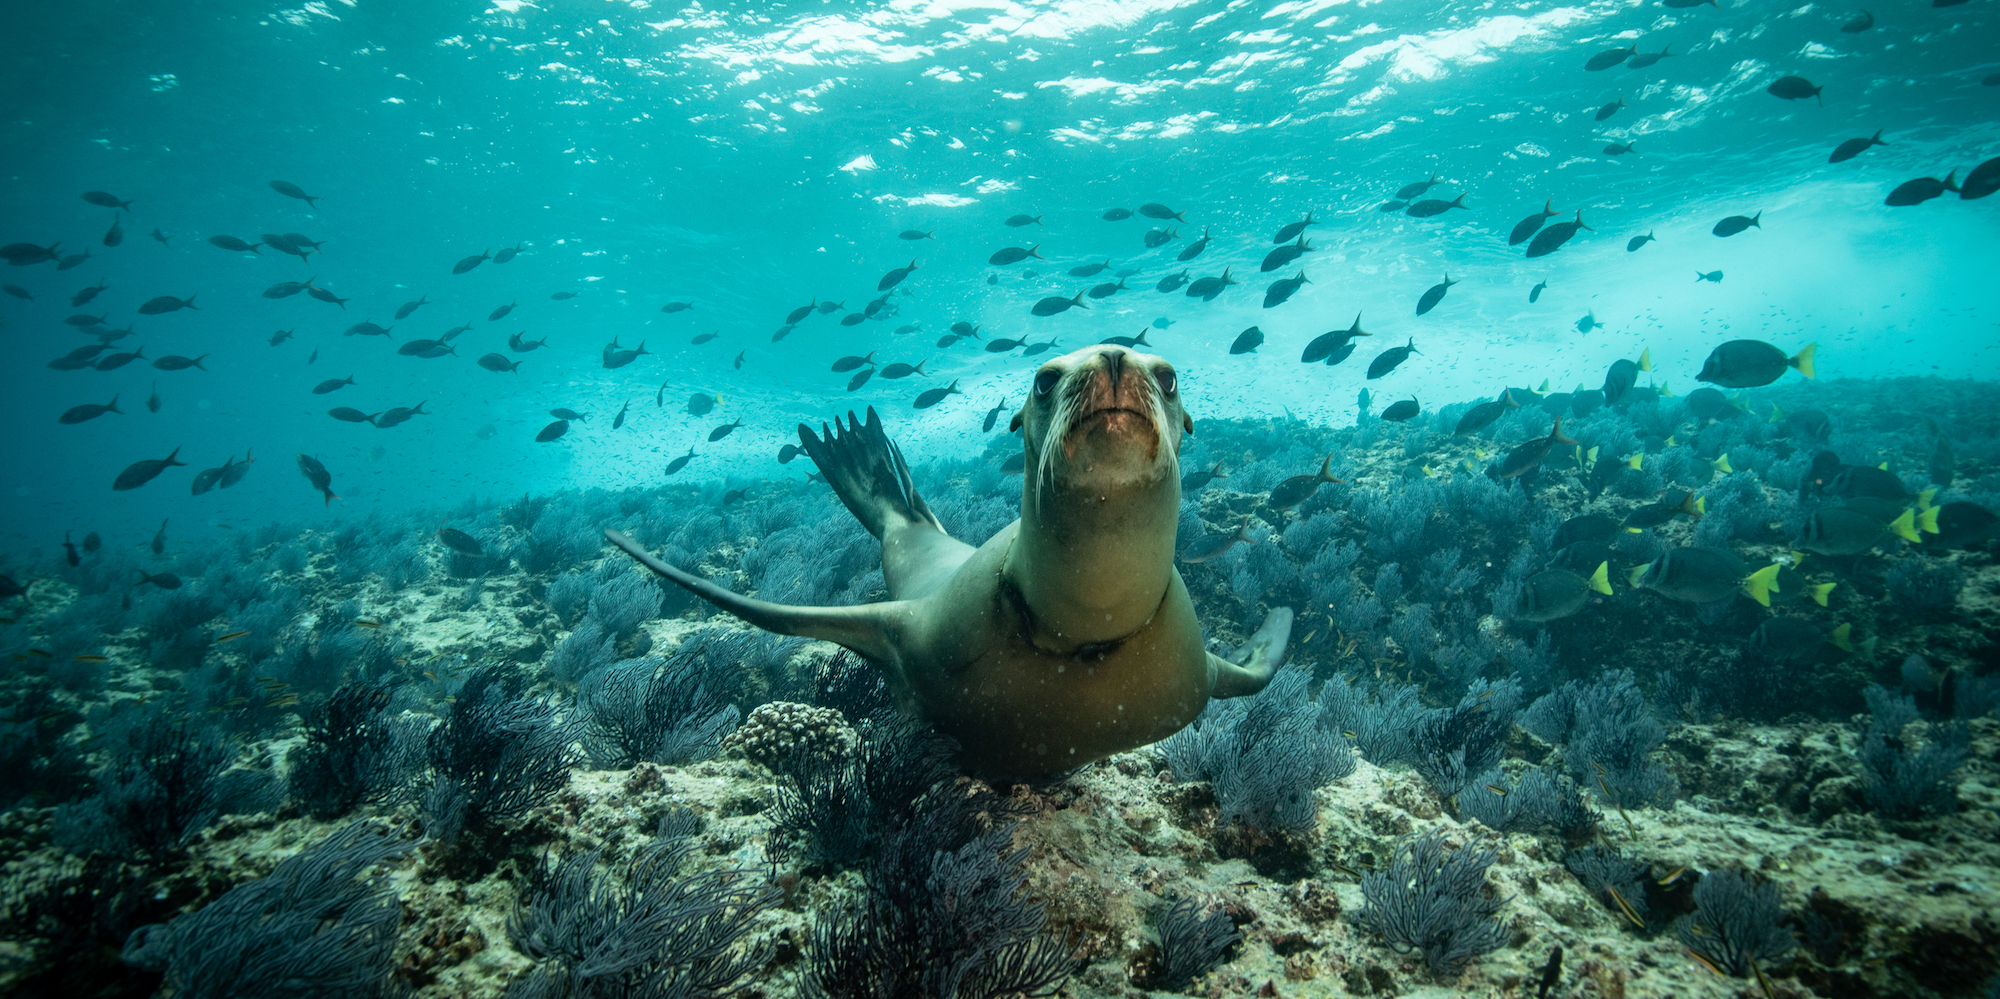 Sea lion snorkeling among a school of fish at the bottom of the Sea of Cortez